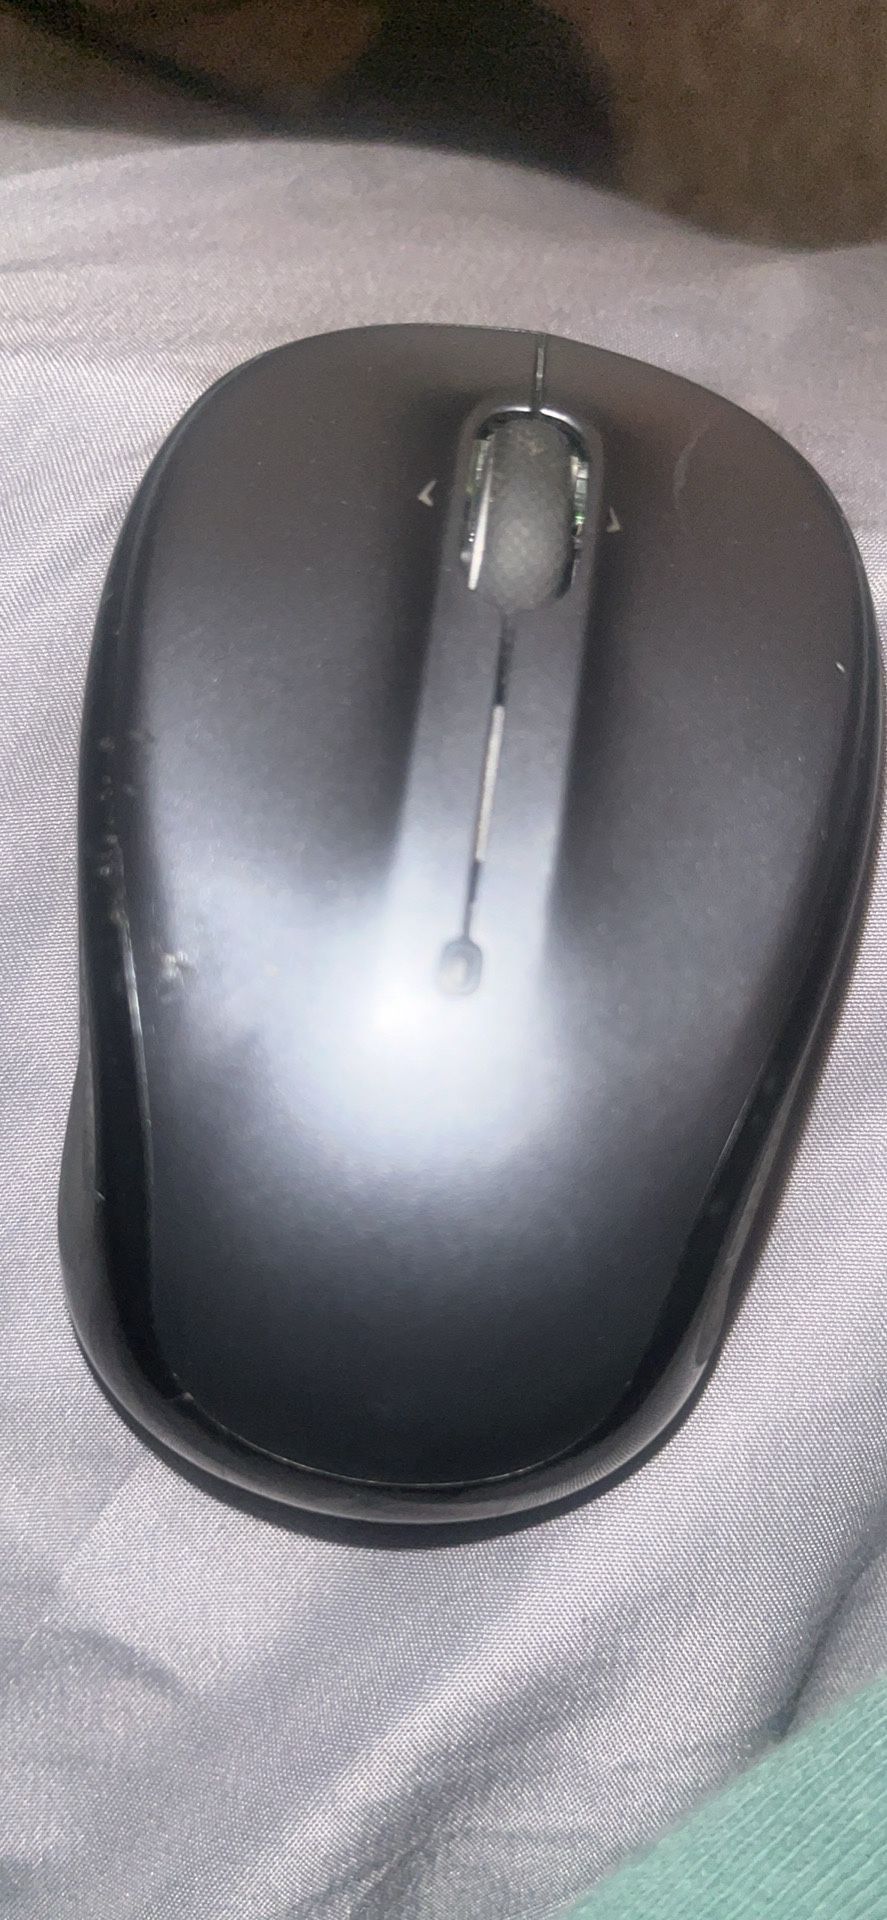 Wireless Mouse 